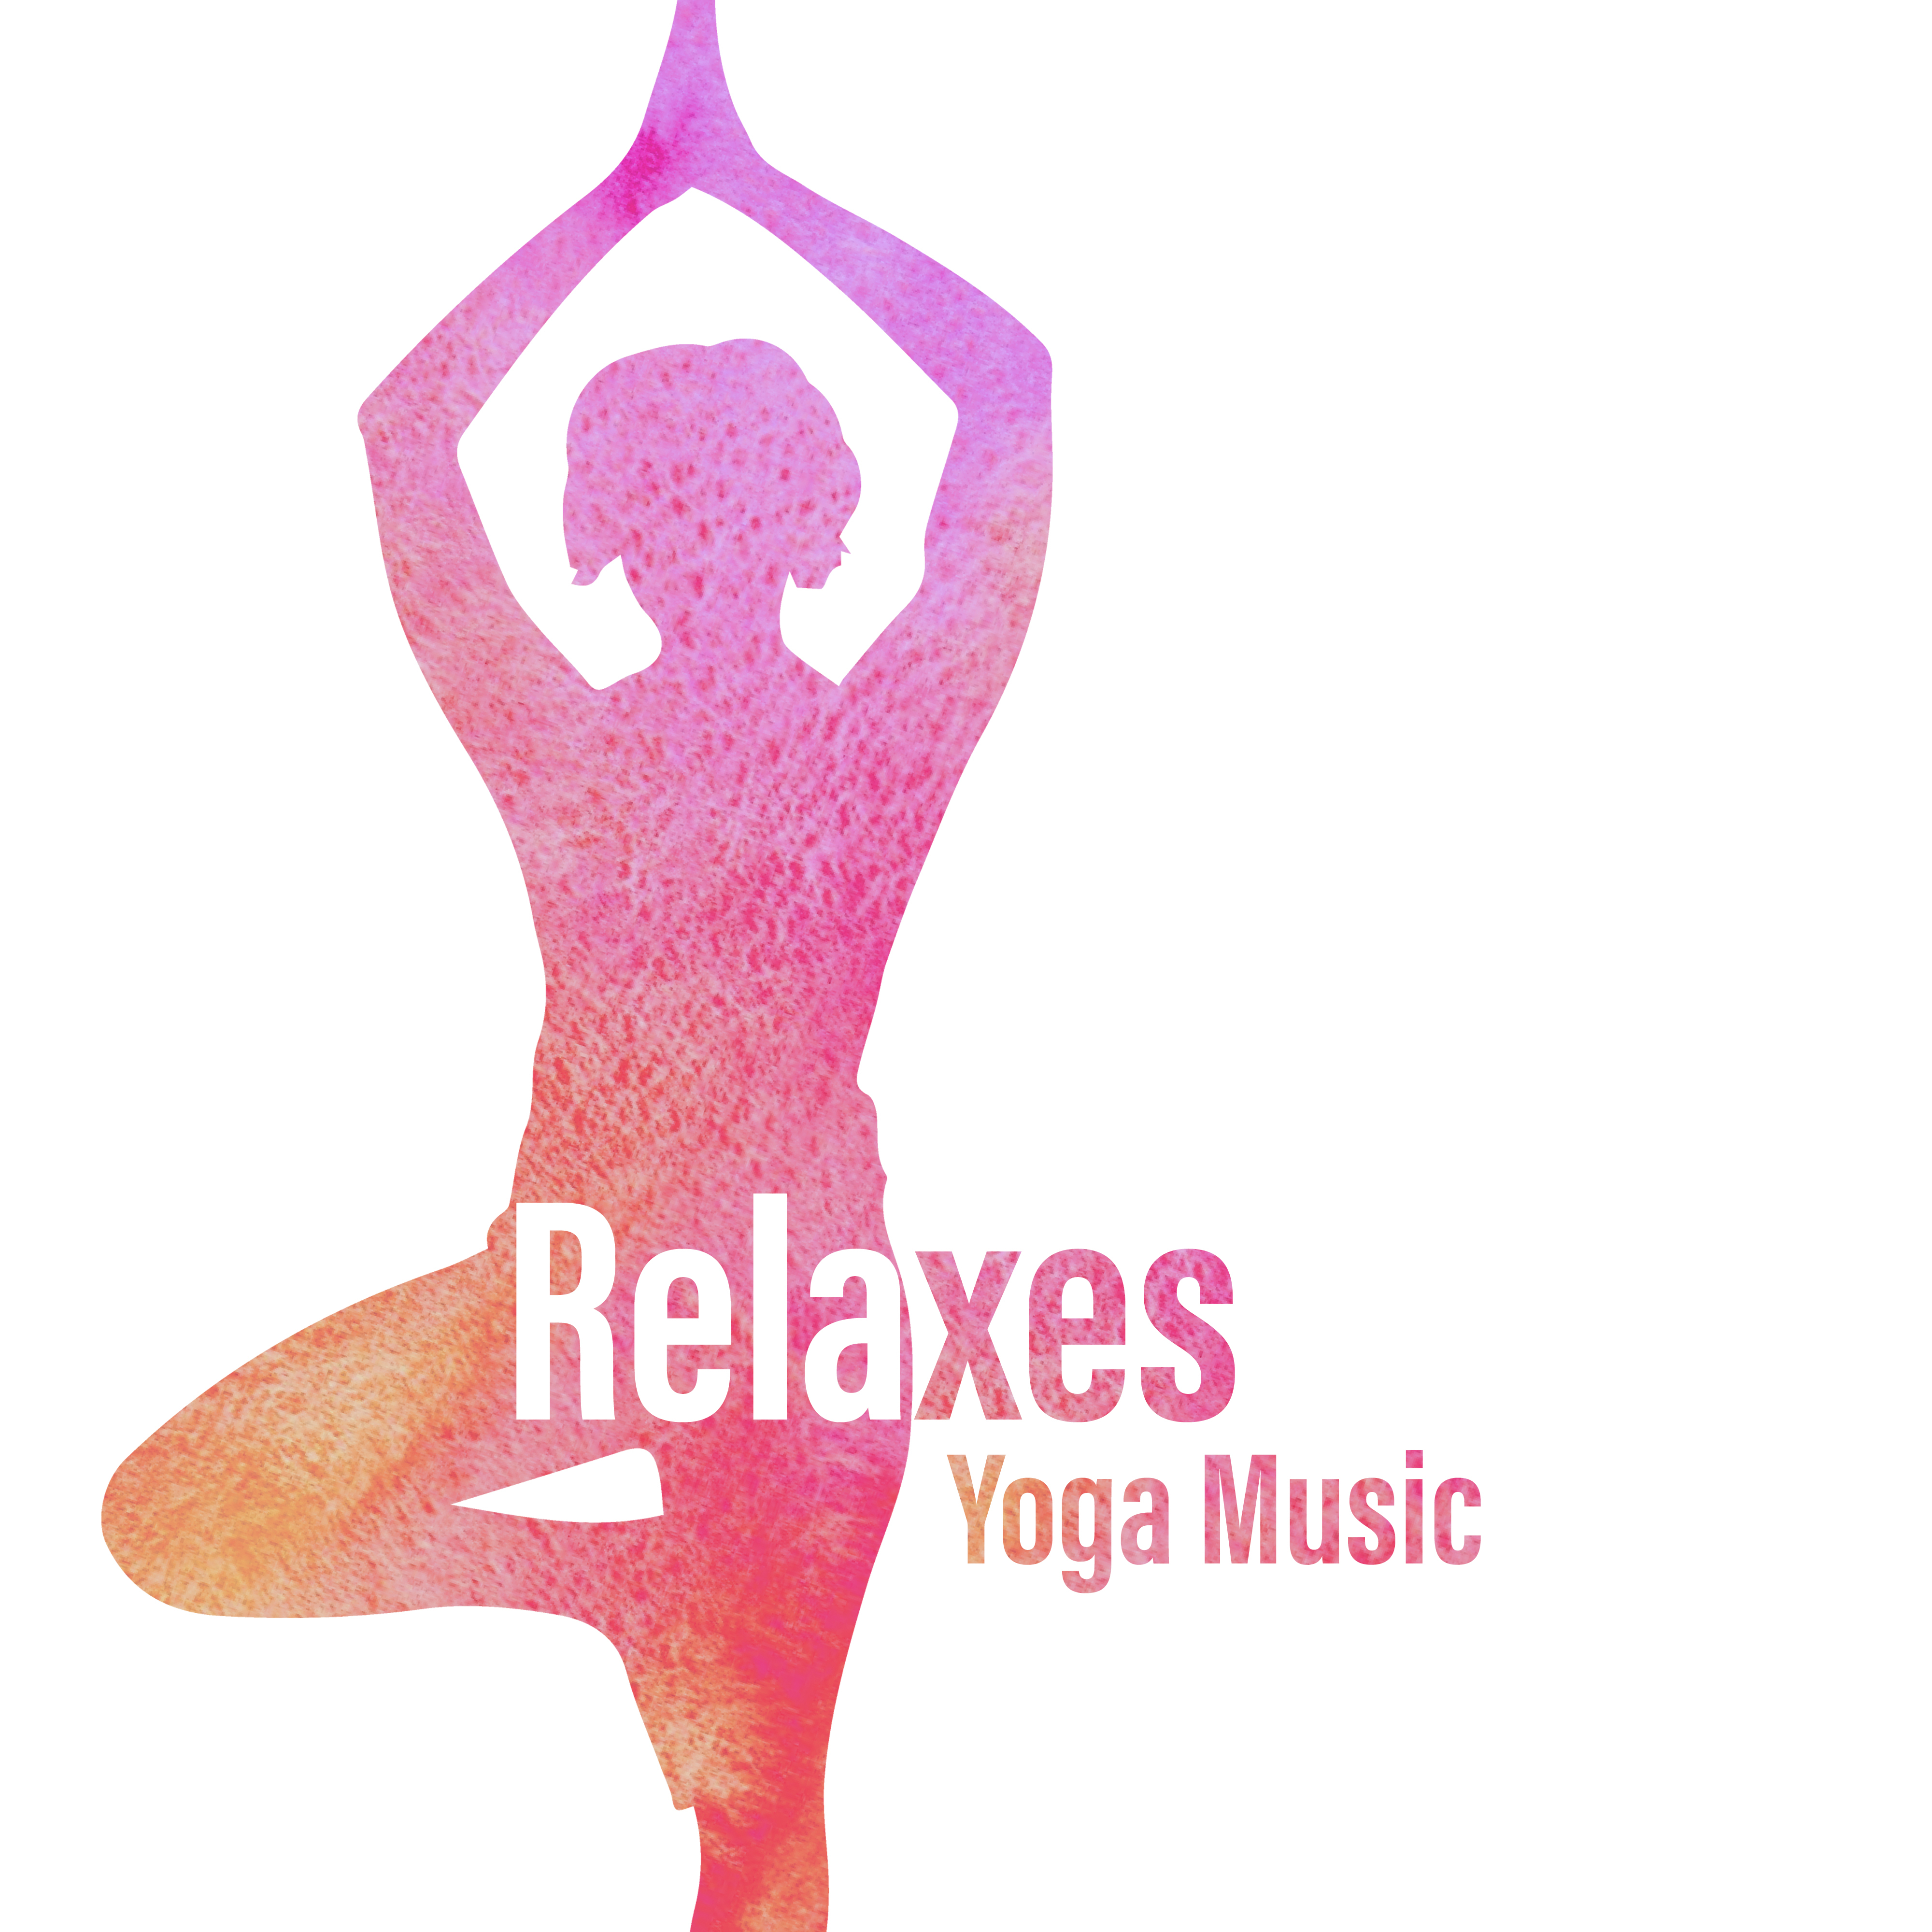 Relaxes Yoga Music